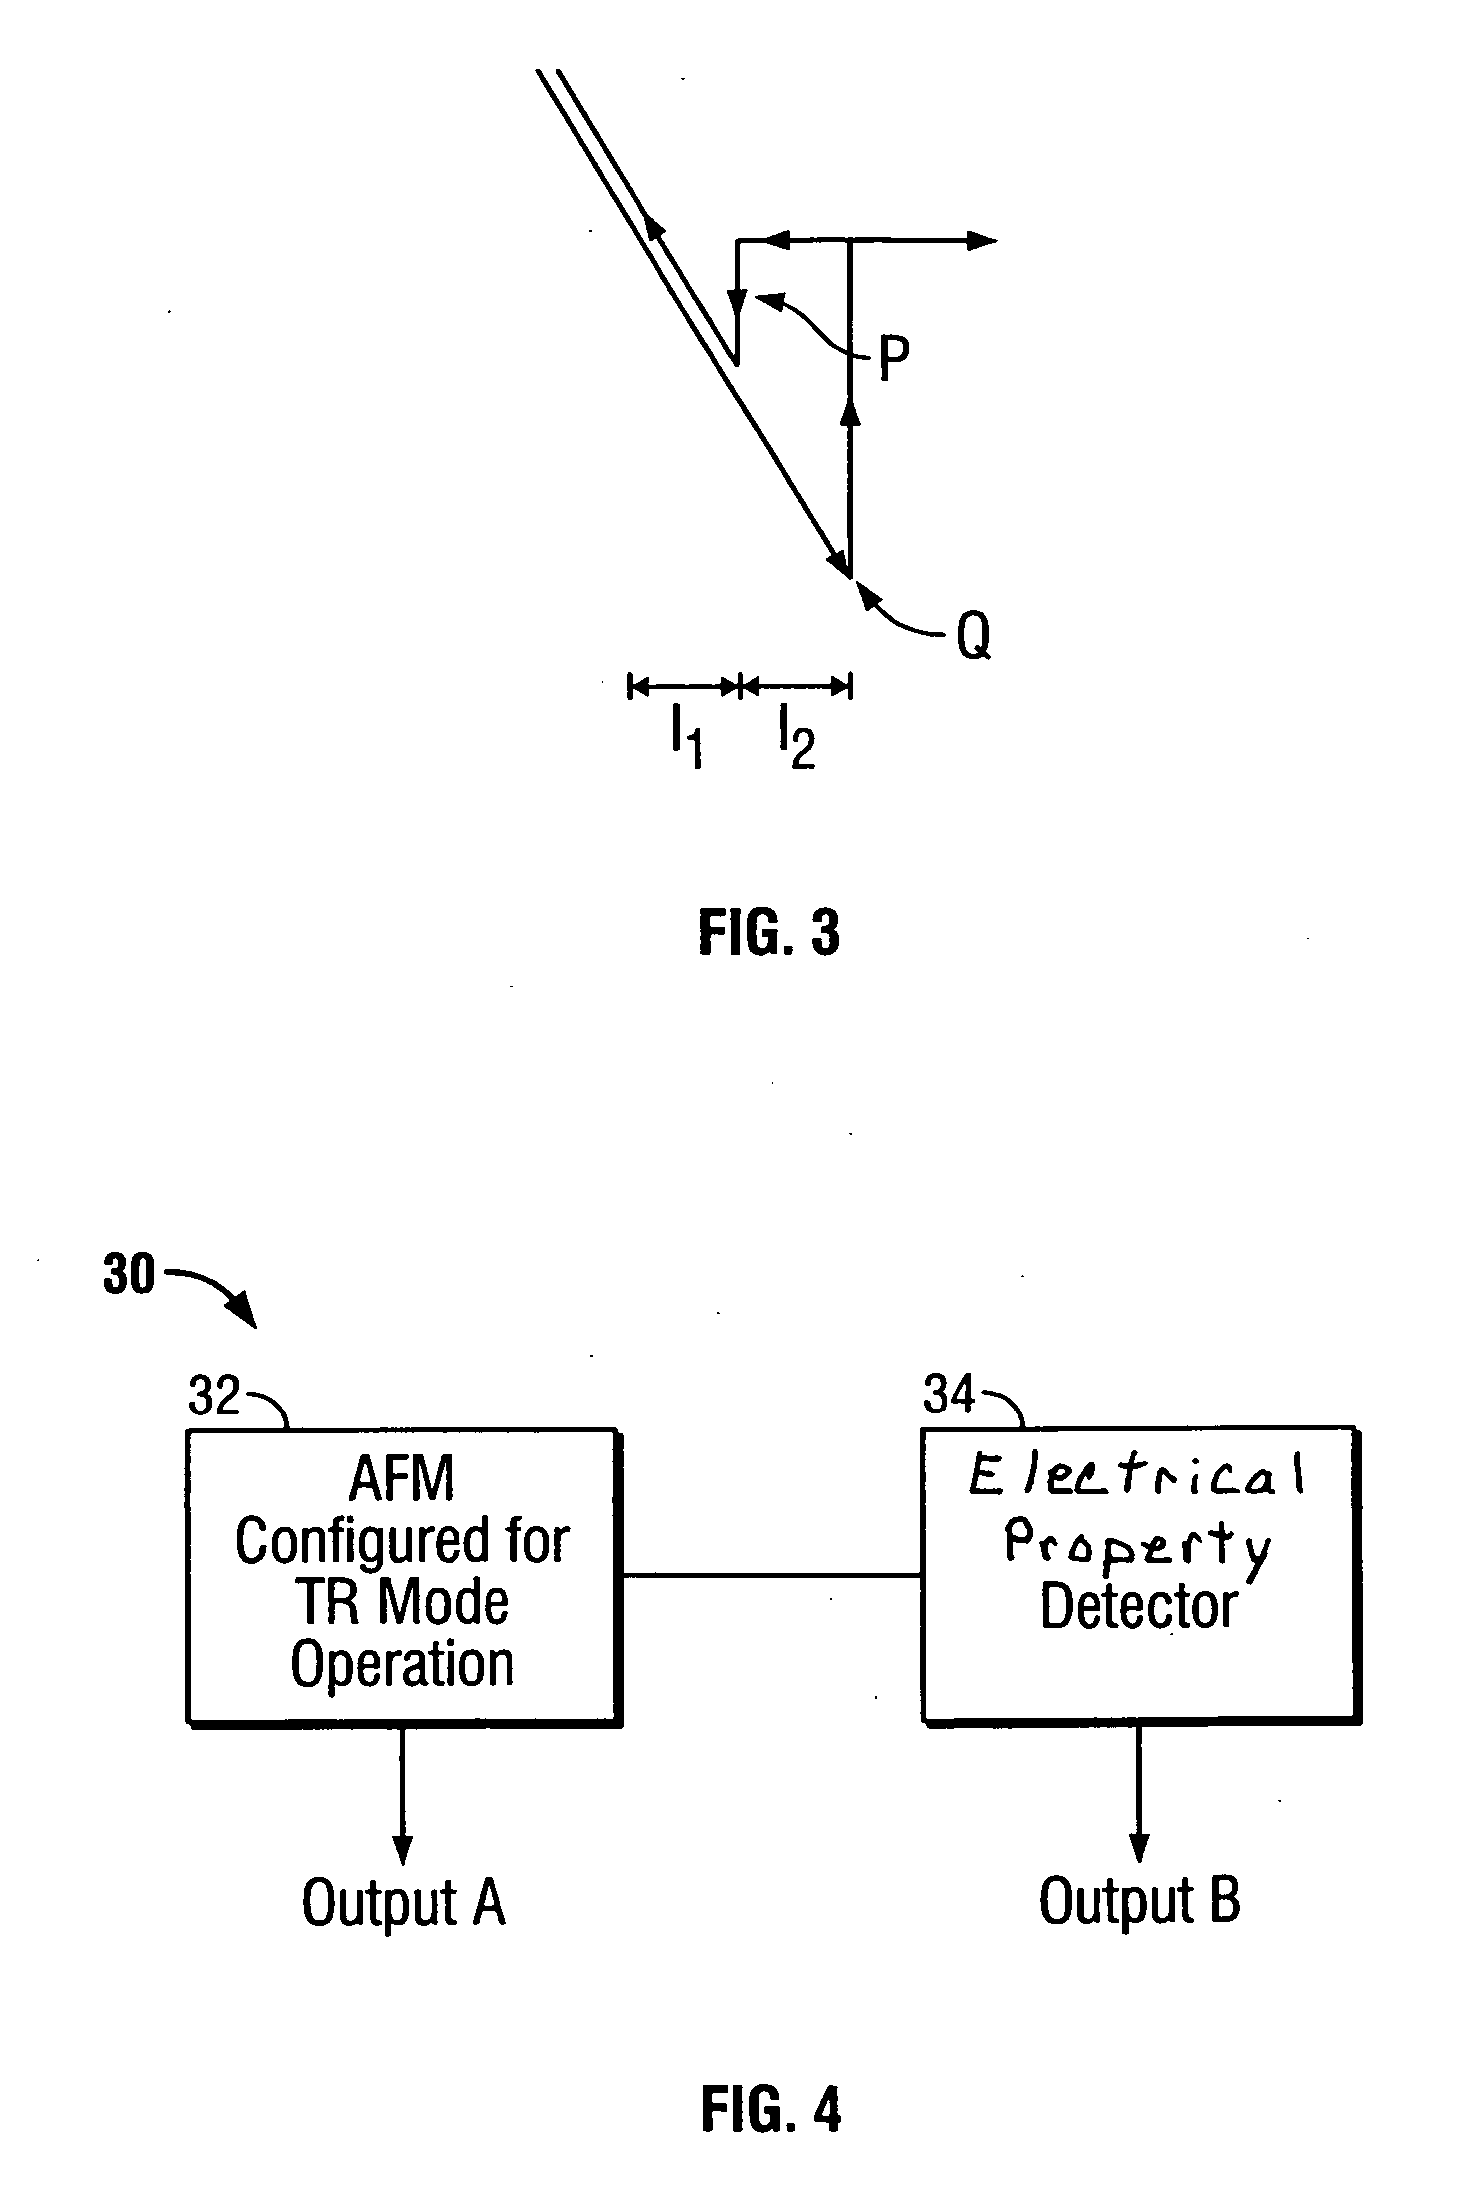 Method and apparatus for measuring electrical properties in torsional resonance mode